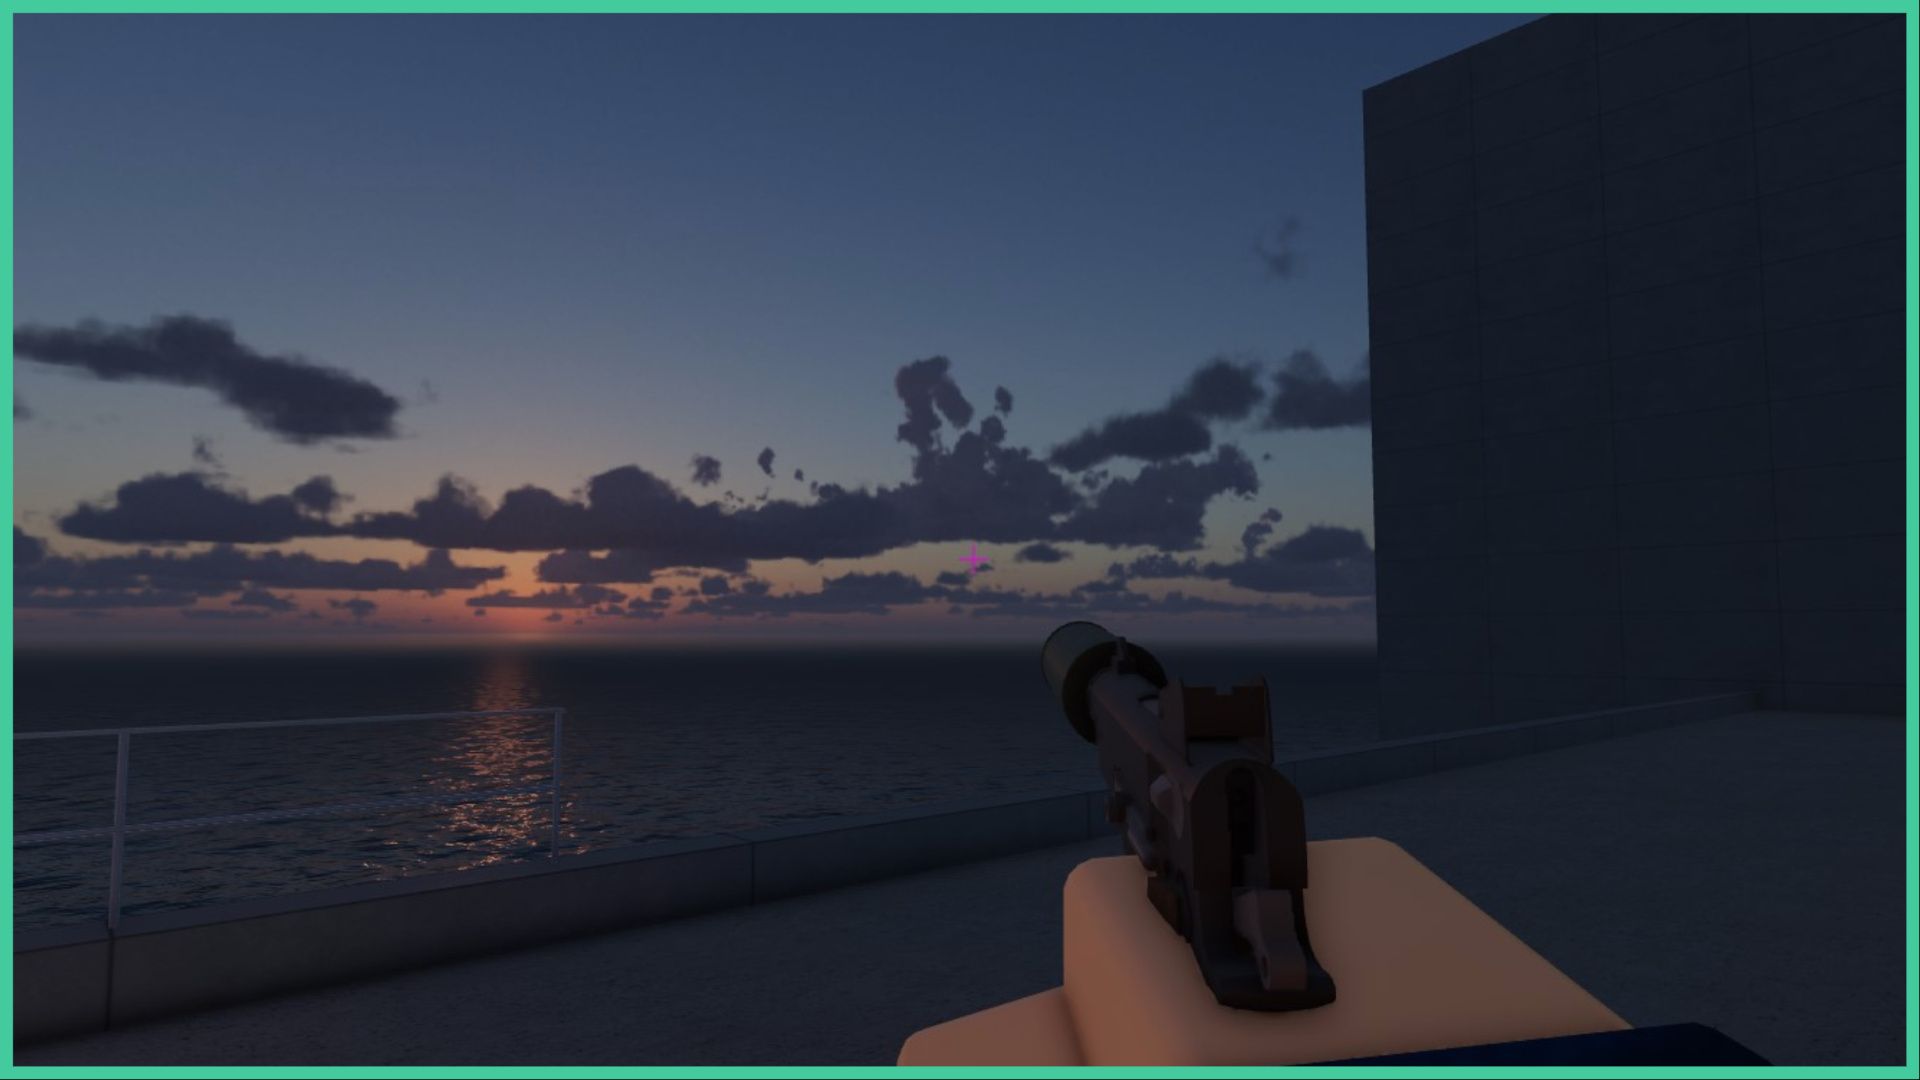 feature image for our arsenal the hunt guide, the image features a screenshot from the start of the event mission, as the player holds a pistol while looking out to the rippling waters of the ocean, with the sun setting and casting a glow on the waters